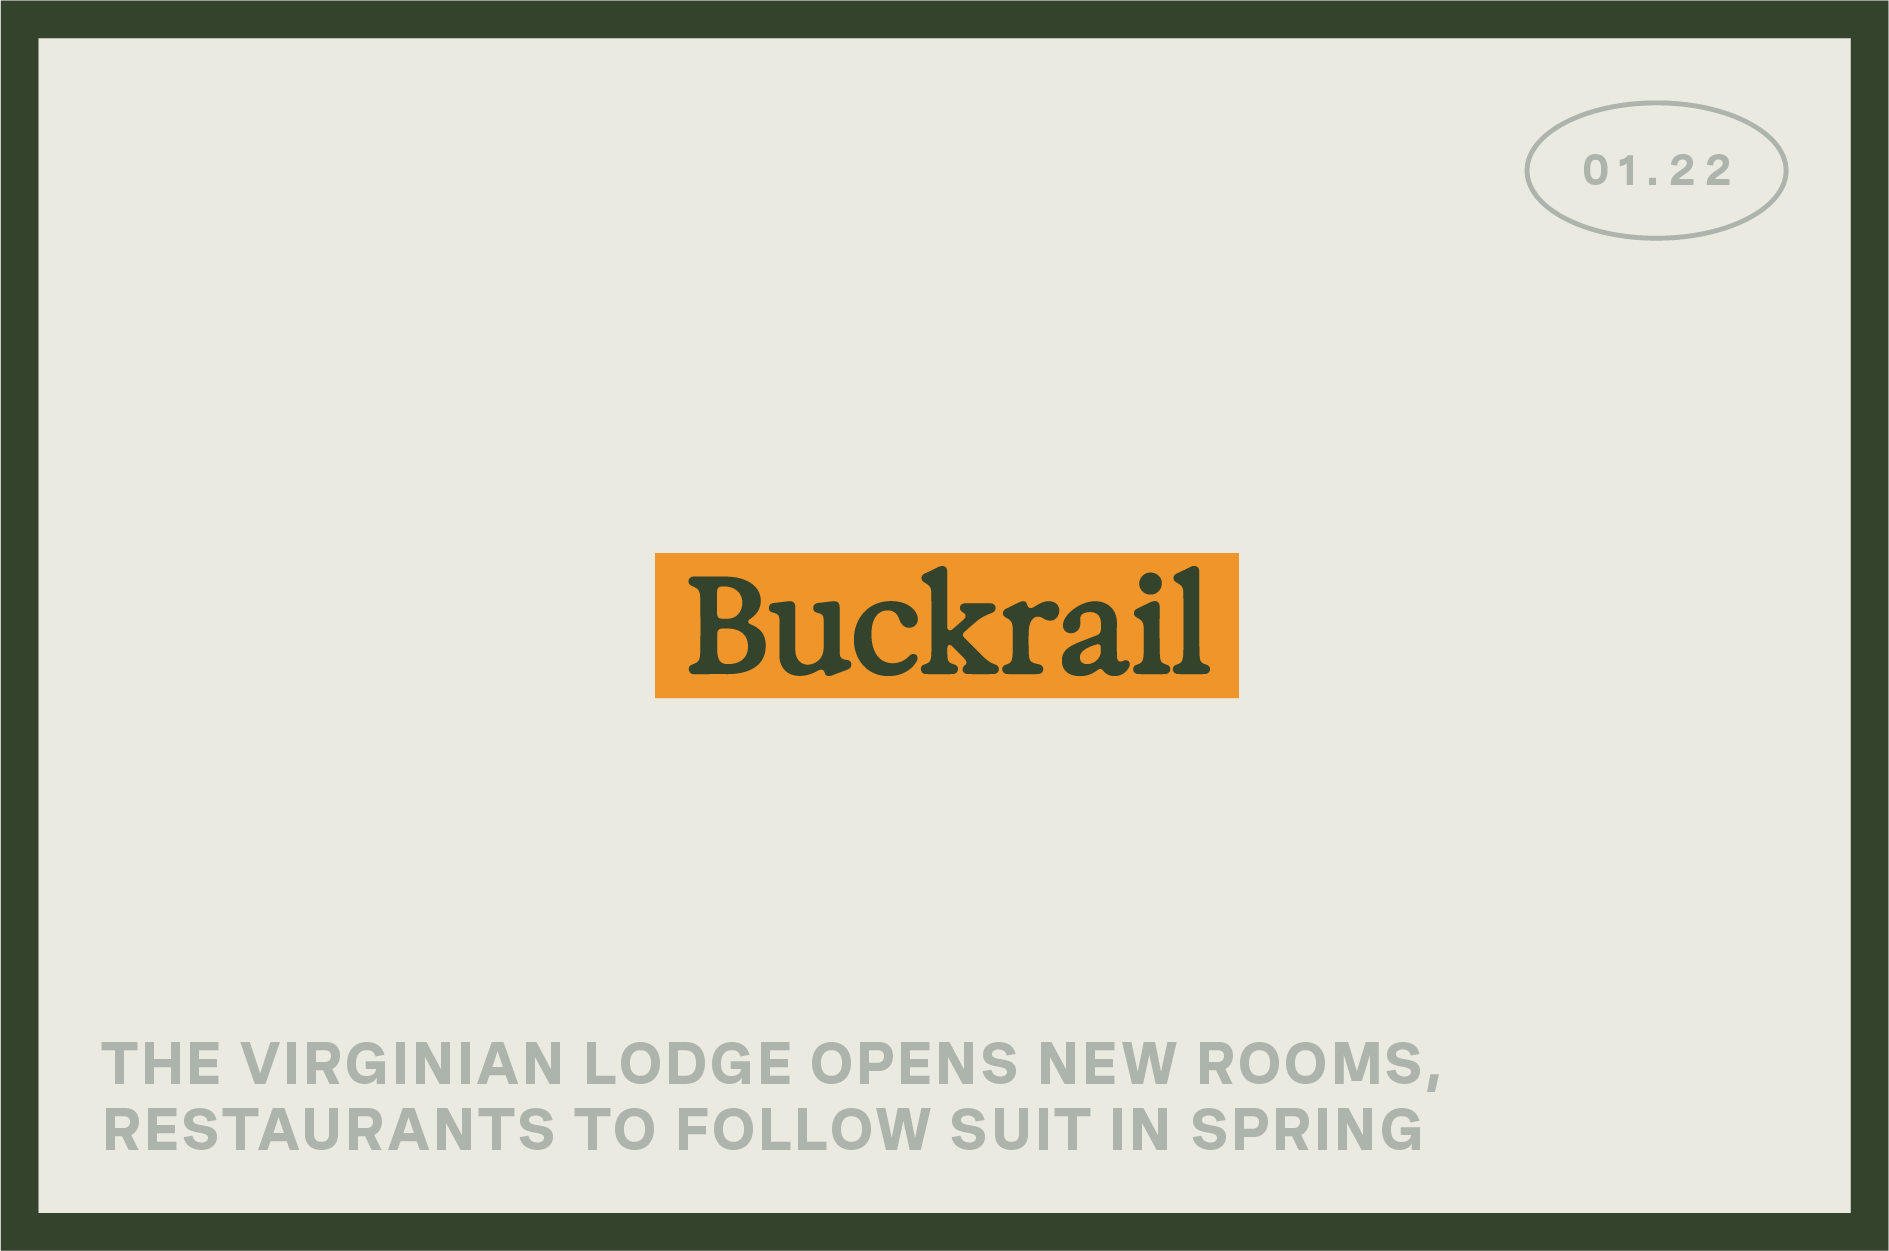 Buckrail: The Virginian Lodge open new rooms, and restaurants to follow suit in spring